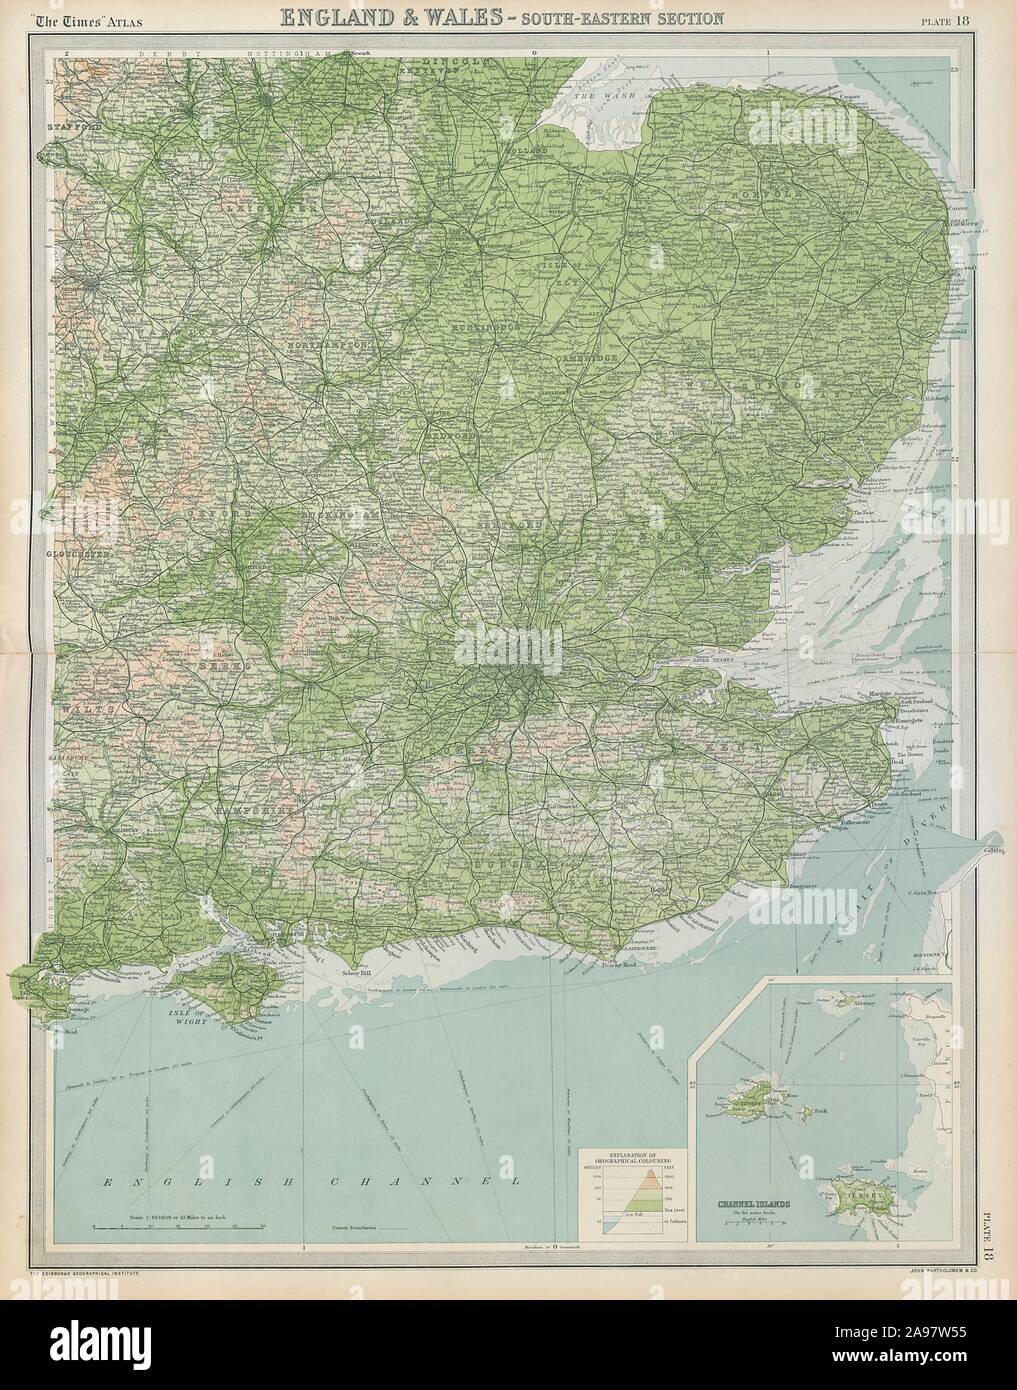 South-East England. Midlands East Anglia Home counties. THE TIMES 1922 old map Stock Photo